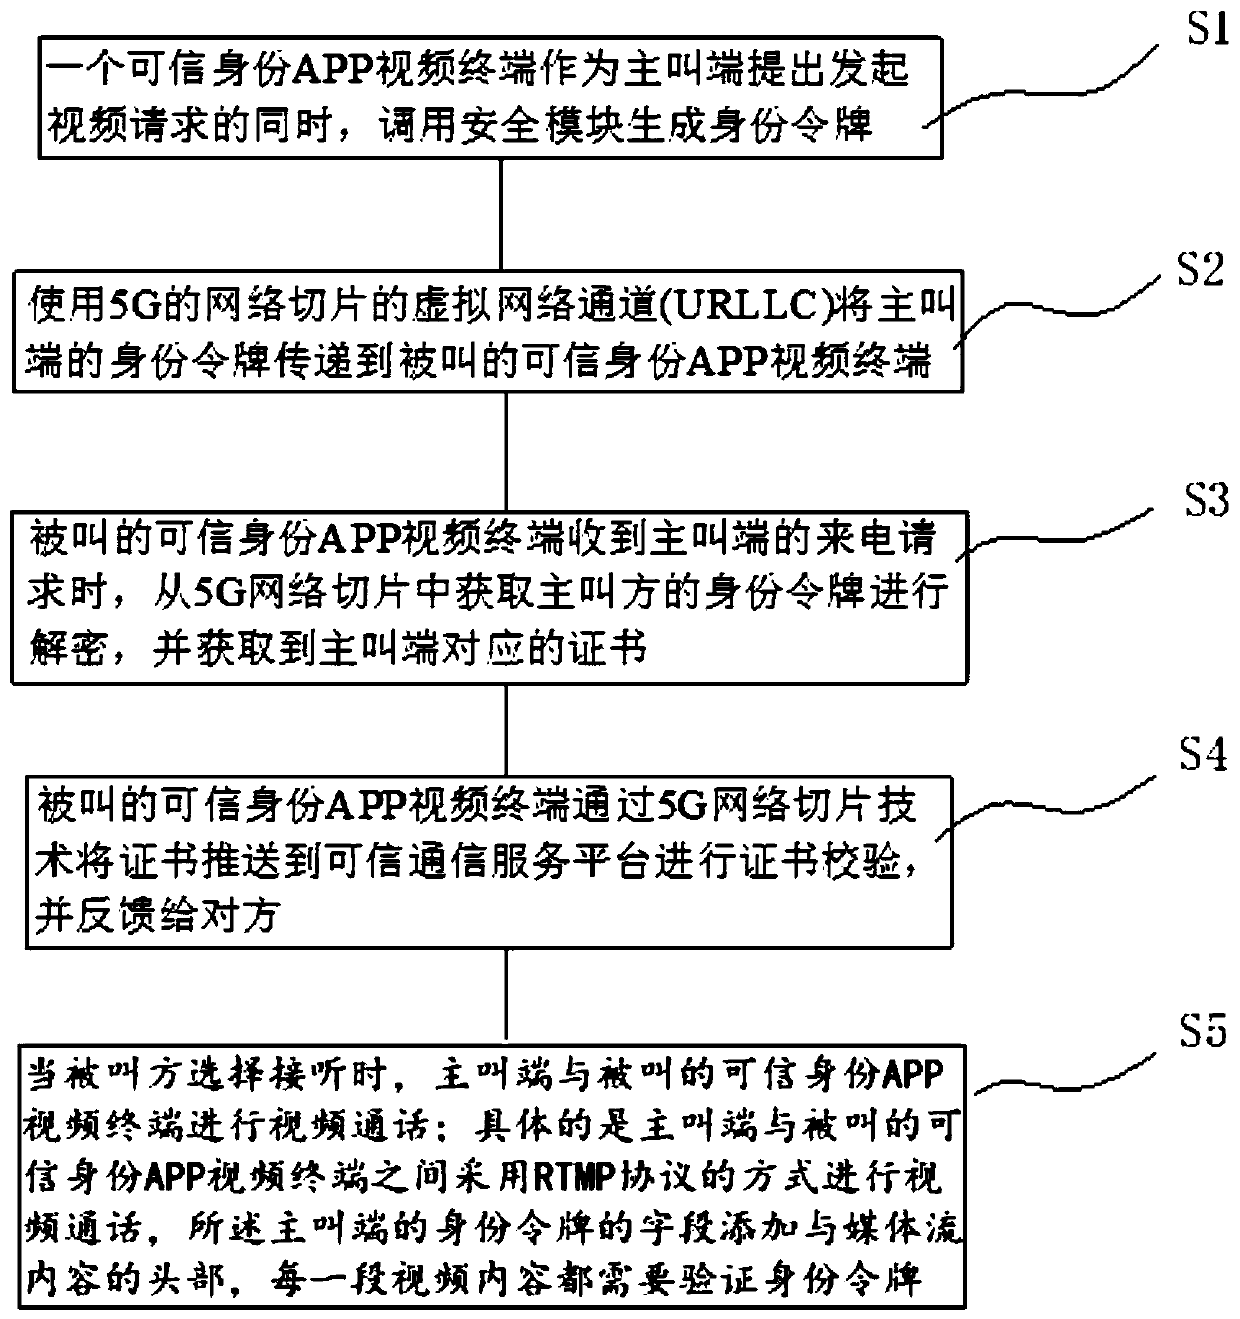 Trusted communication system and method